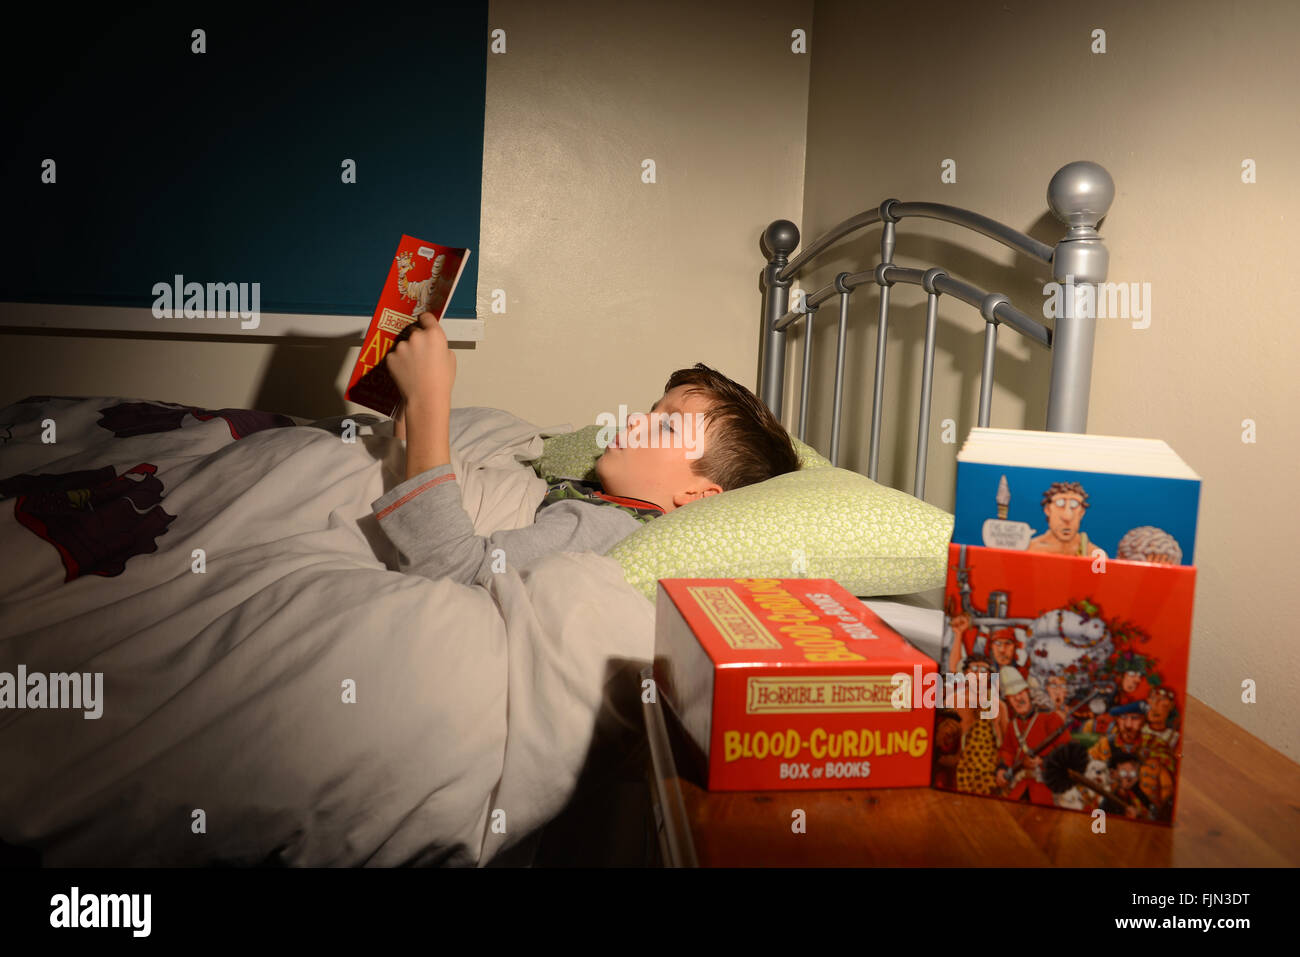 Boy reading 'Horrible Histories' book in bed, child reading a book lying in his bed, bedtime story, bedtime read Stock Photo